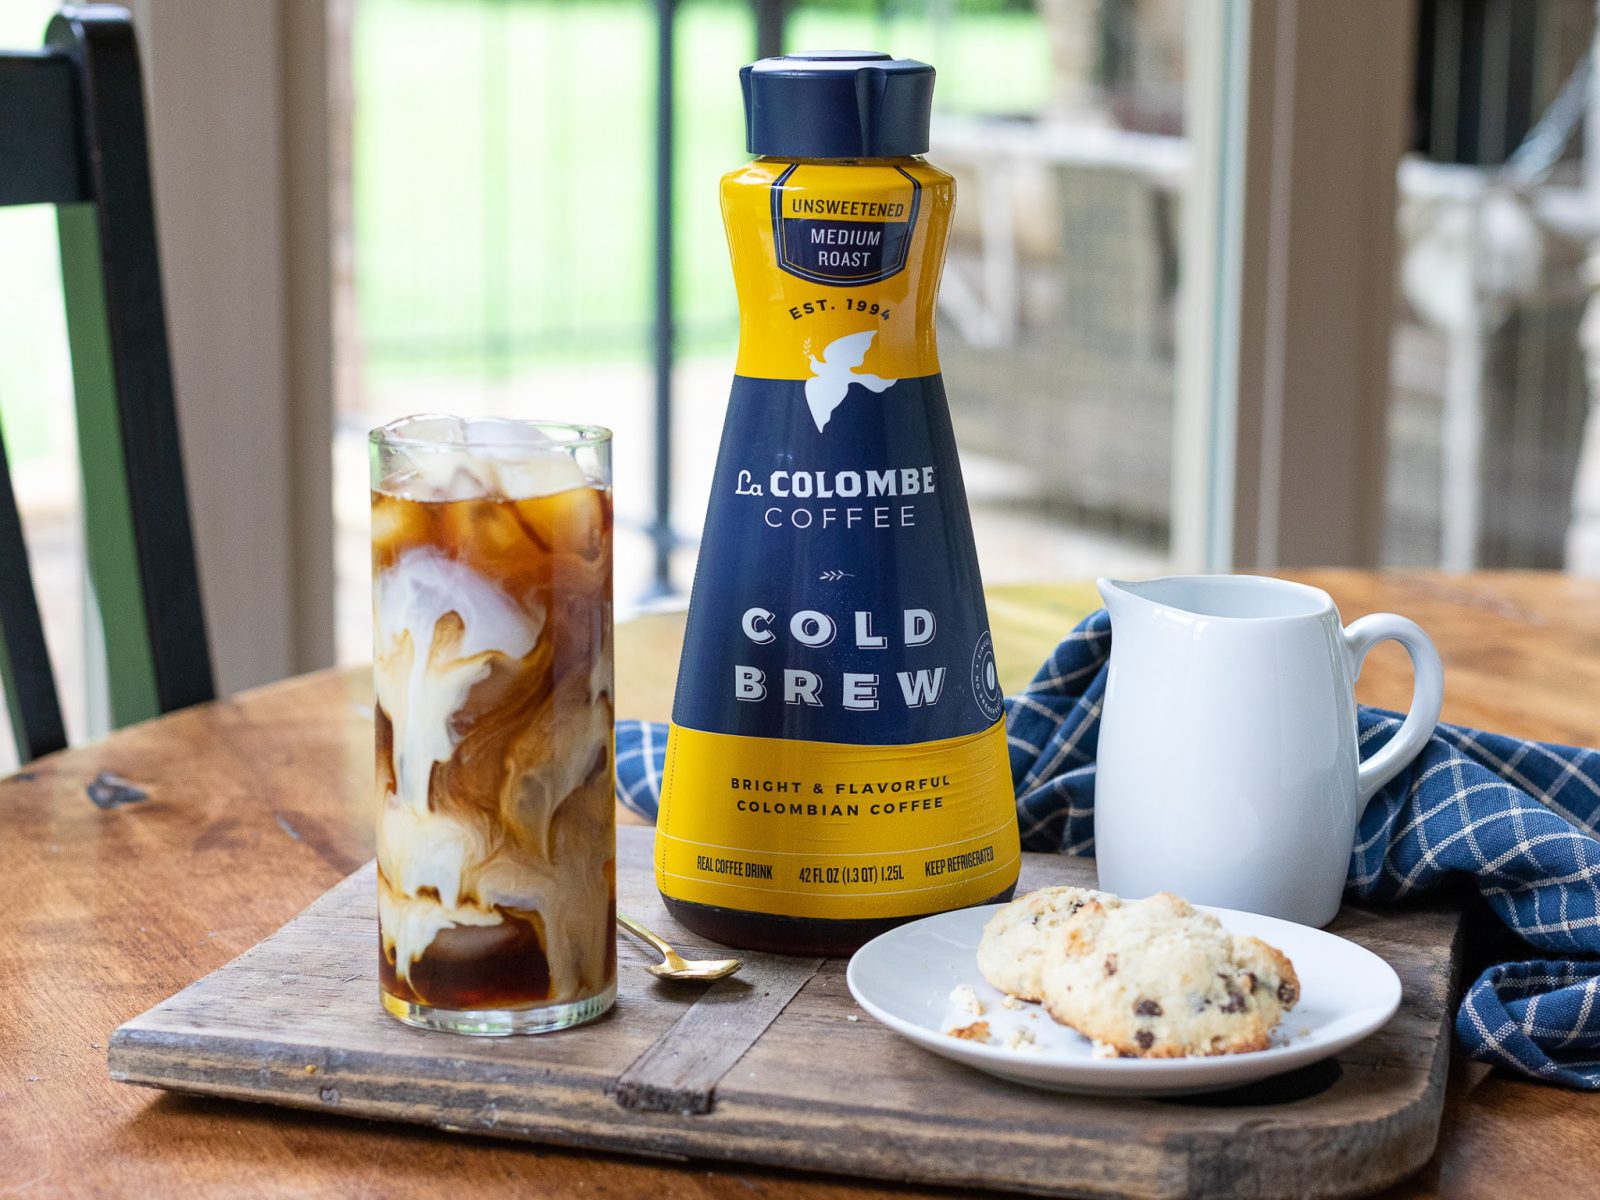 La Colombe Cold Brew As Low As $1.49 At Kroger (Regular Price $5.29)